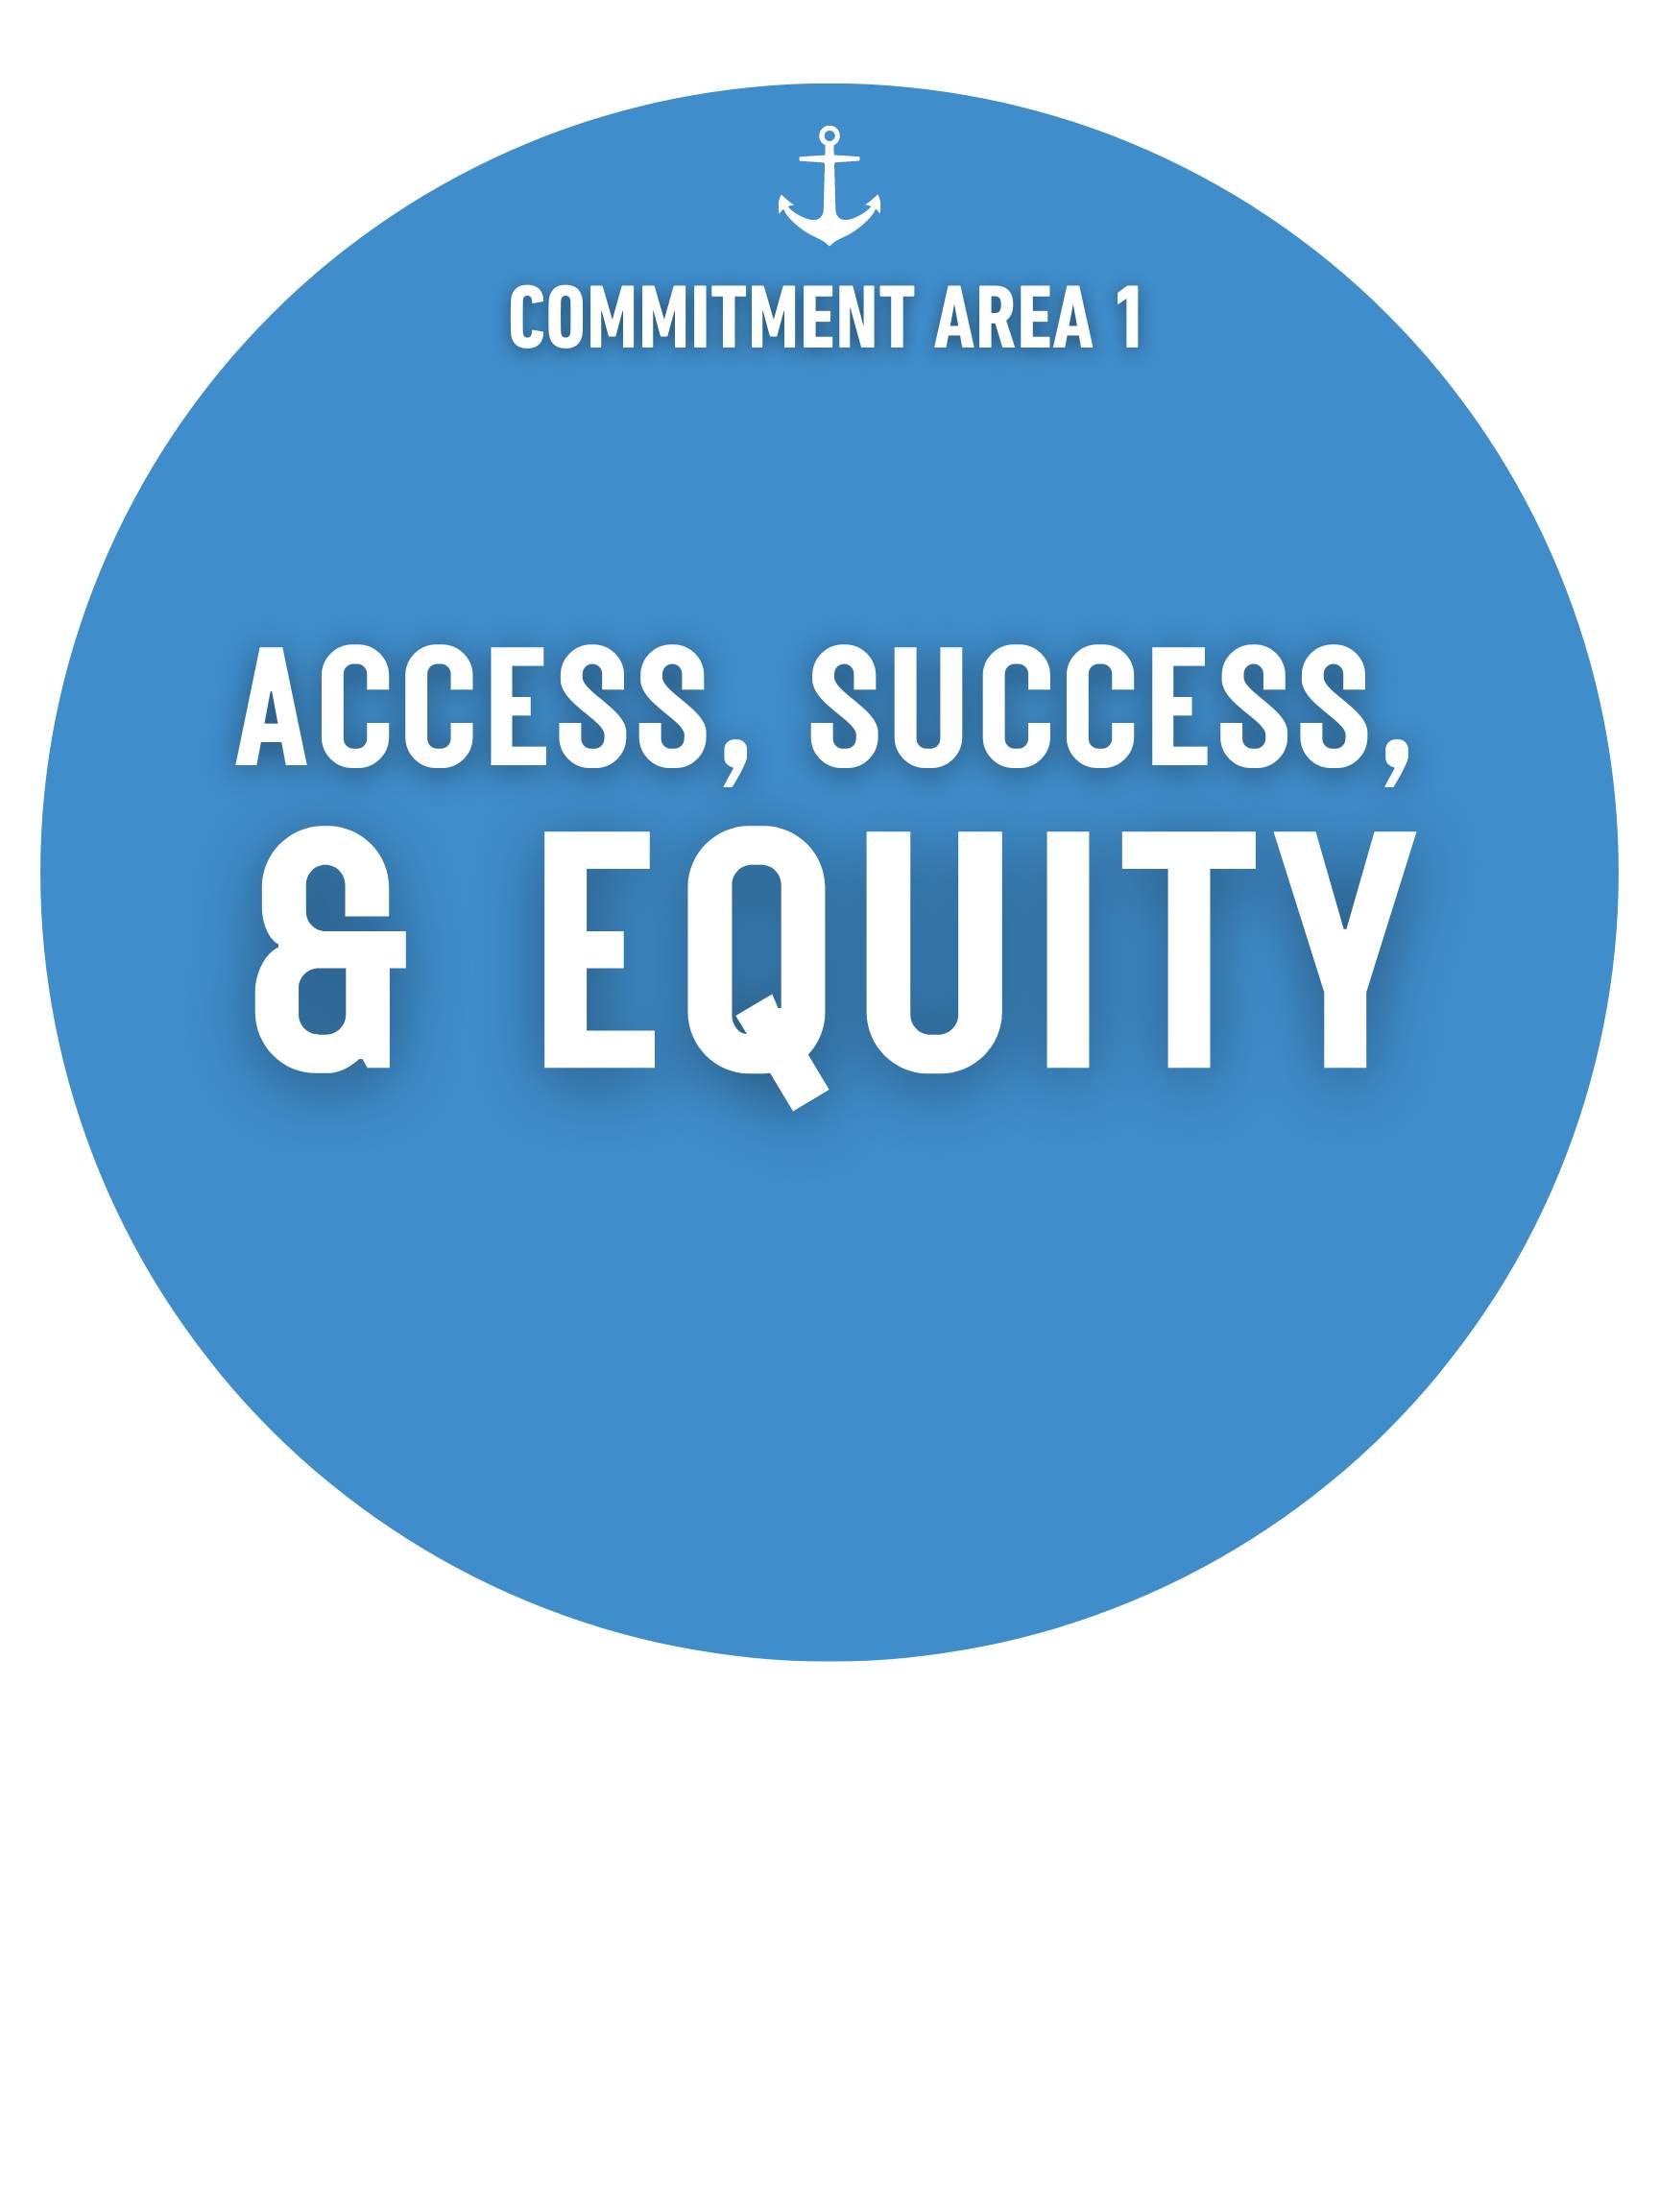 COMMITMENT AREA 1: ACCESS, SUCCESS, & EQUITY